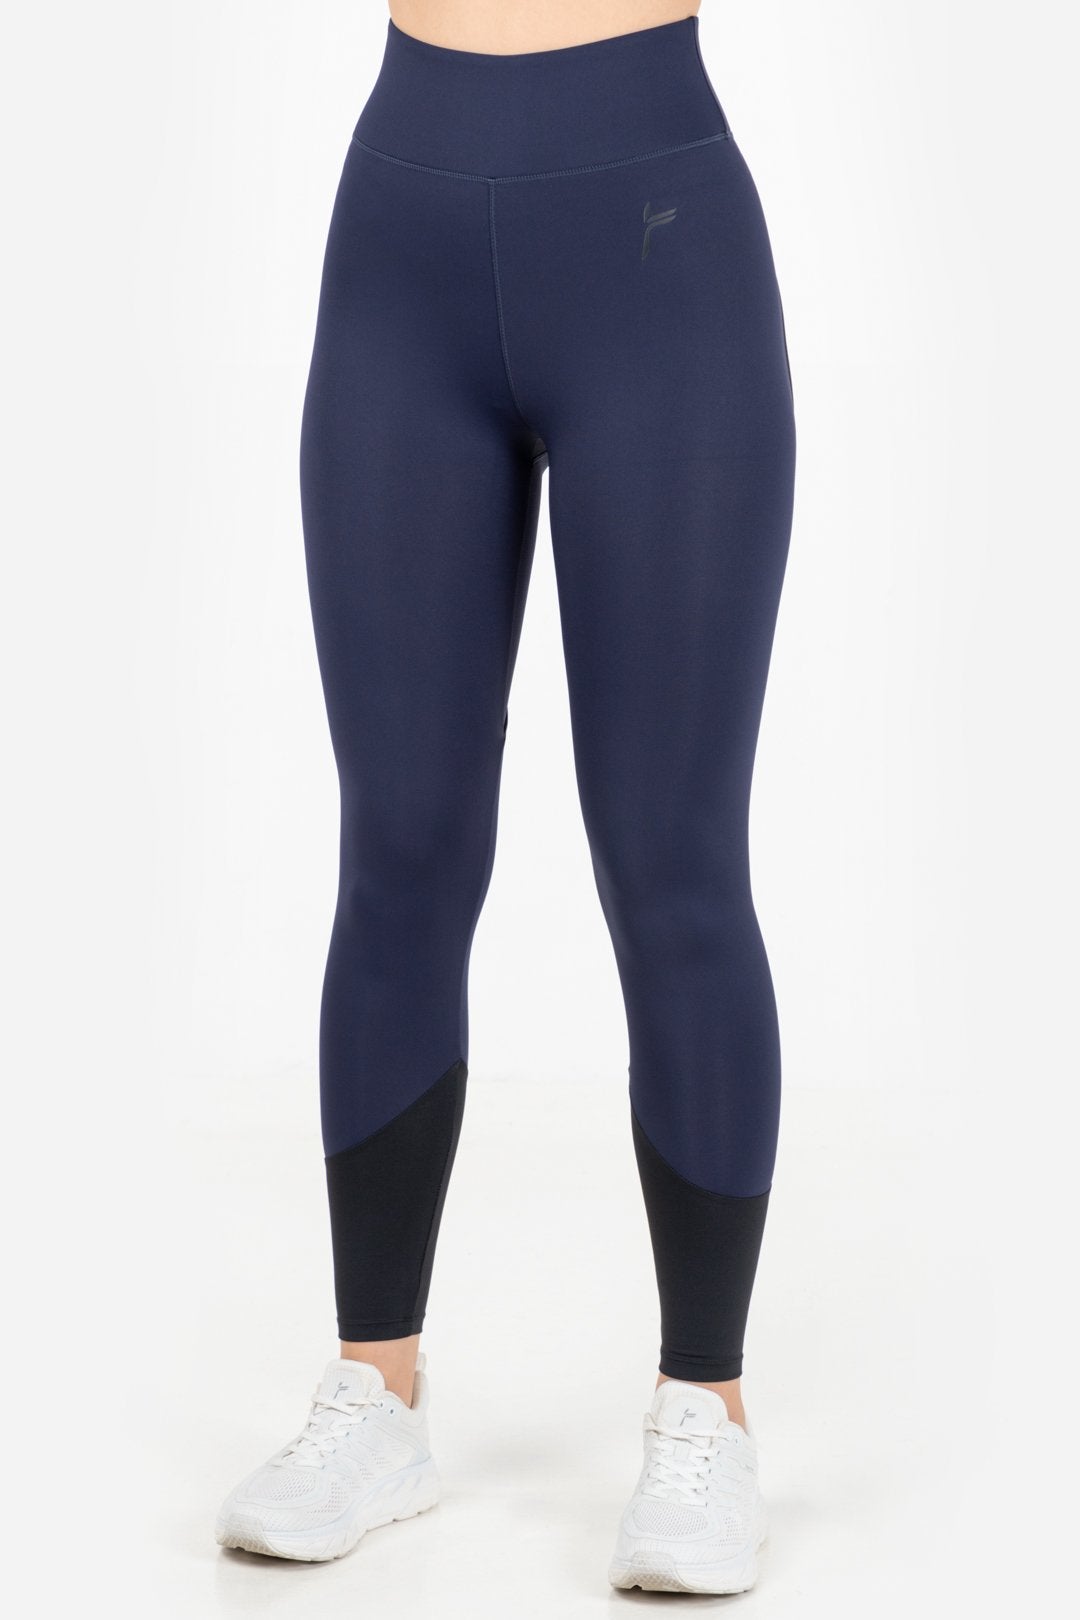 Training tights for women, Squat proof, Sales